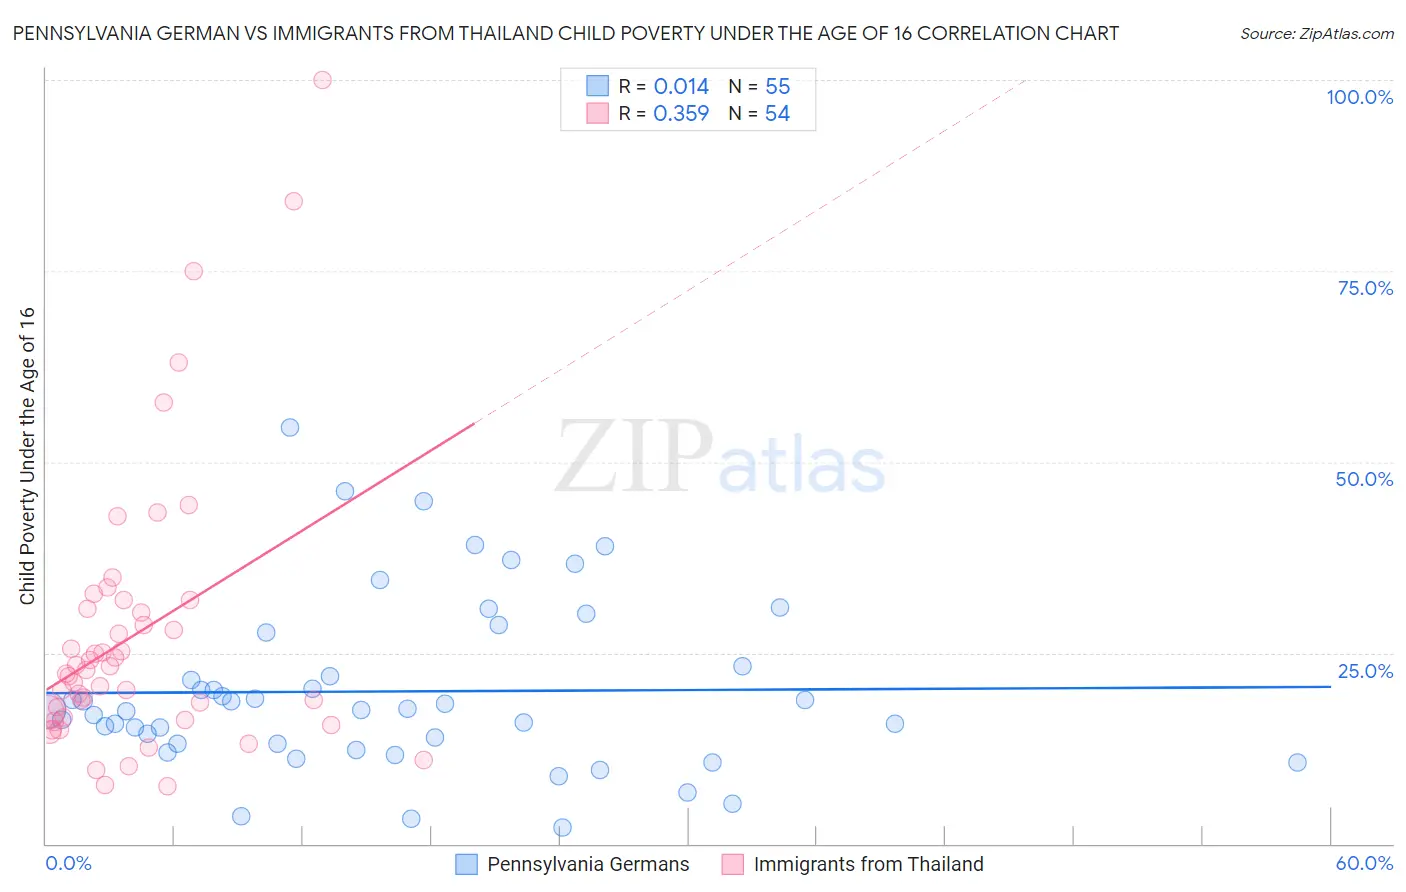 Pennsylvania German vs Immigrants from Thailand Child Poverty Under the Age of 16